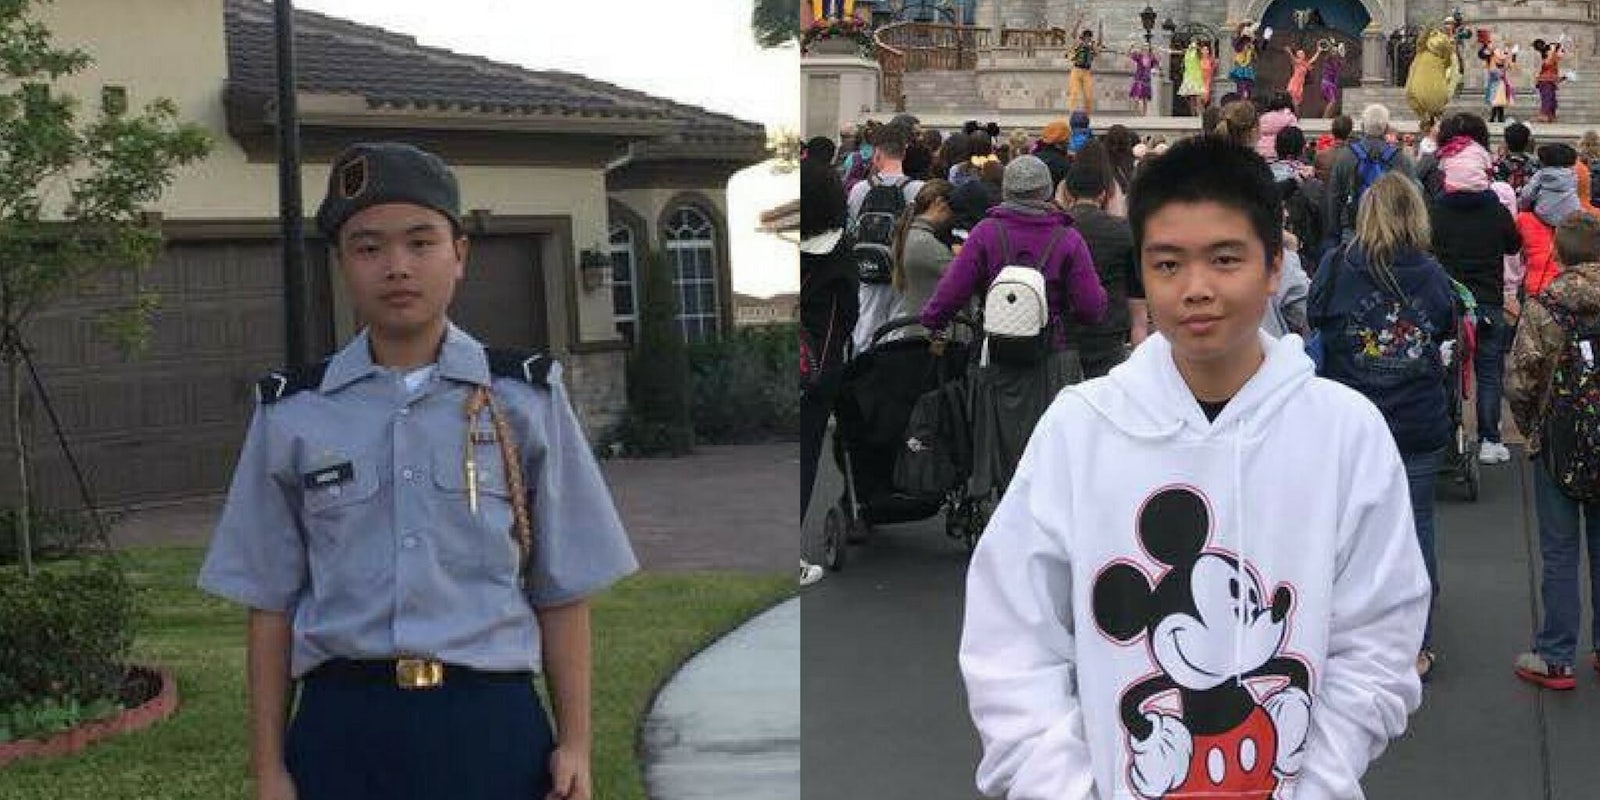 A White House petition has been created for Peter Wang, a Parkland shooting victim who helped other students escape, to receive a full honors military funeral.